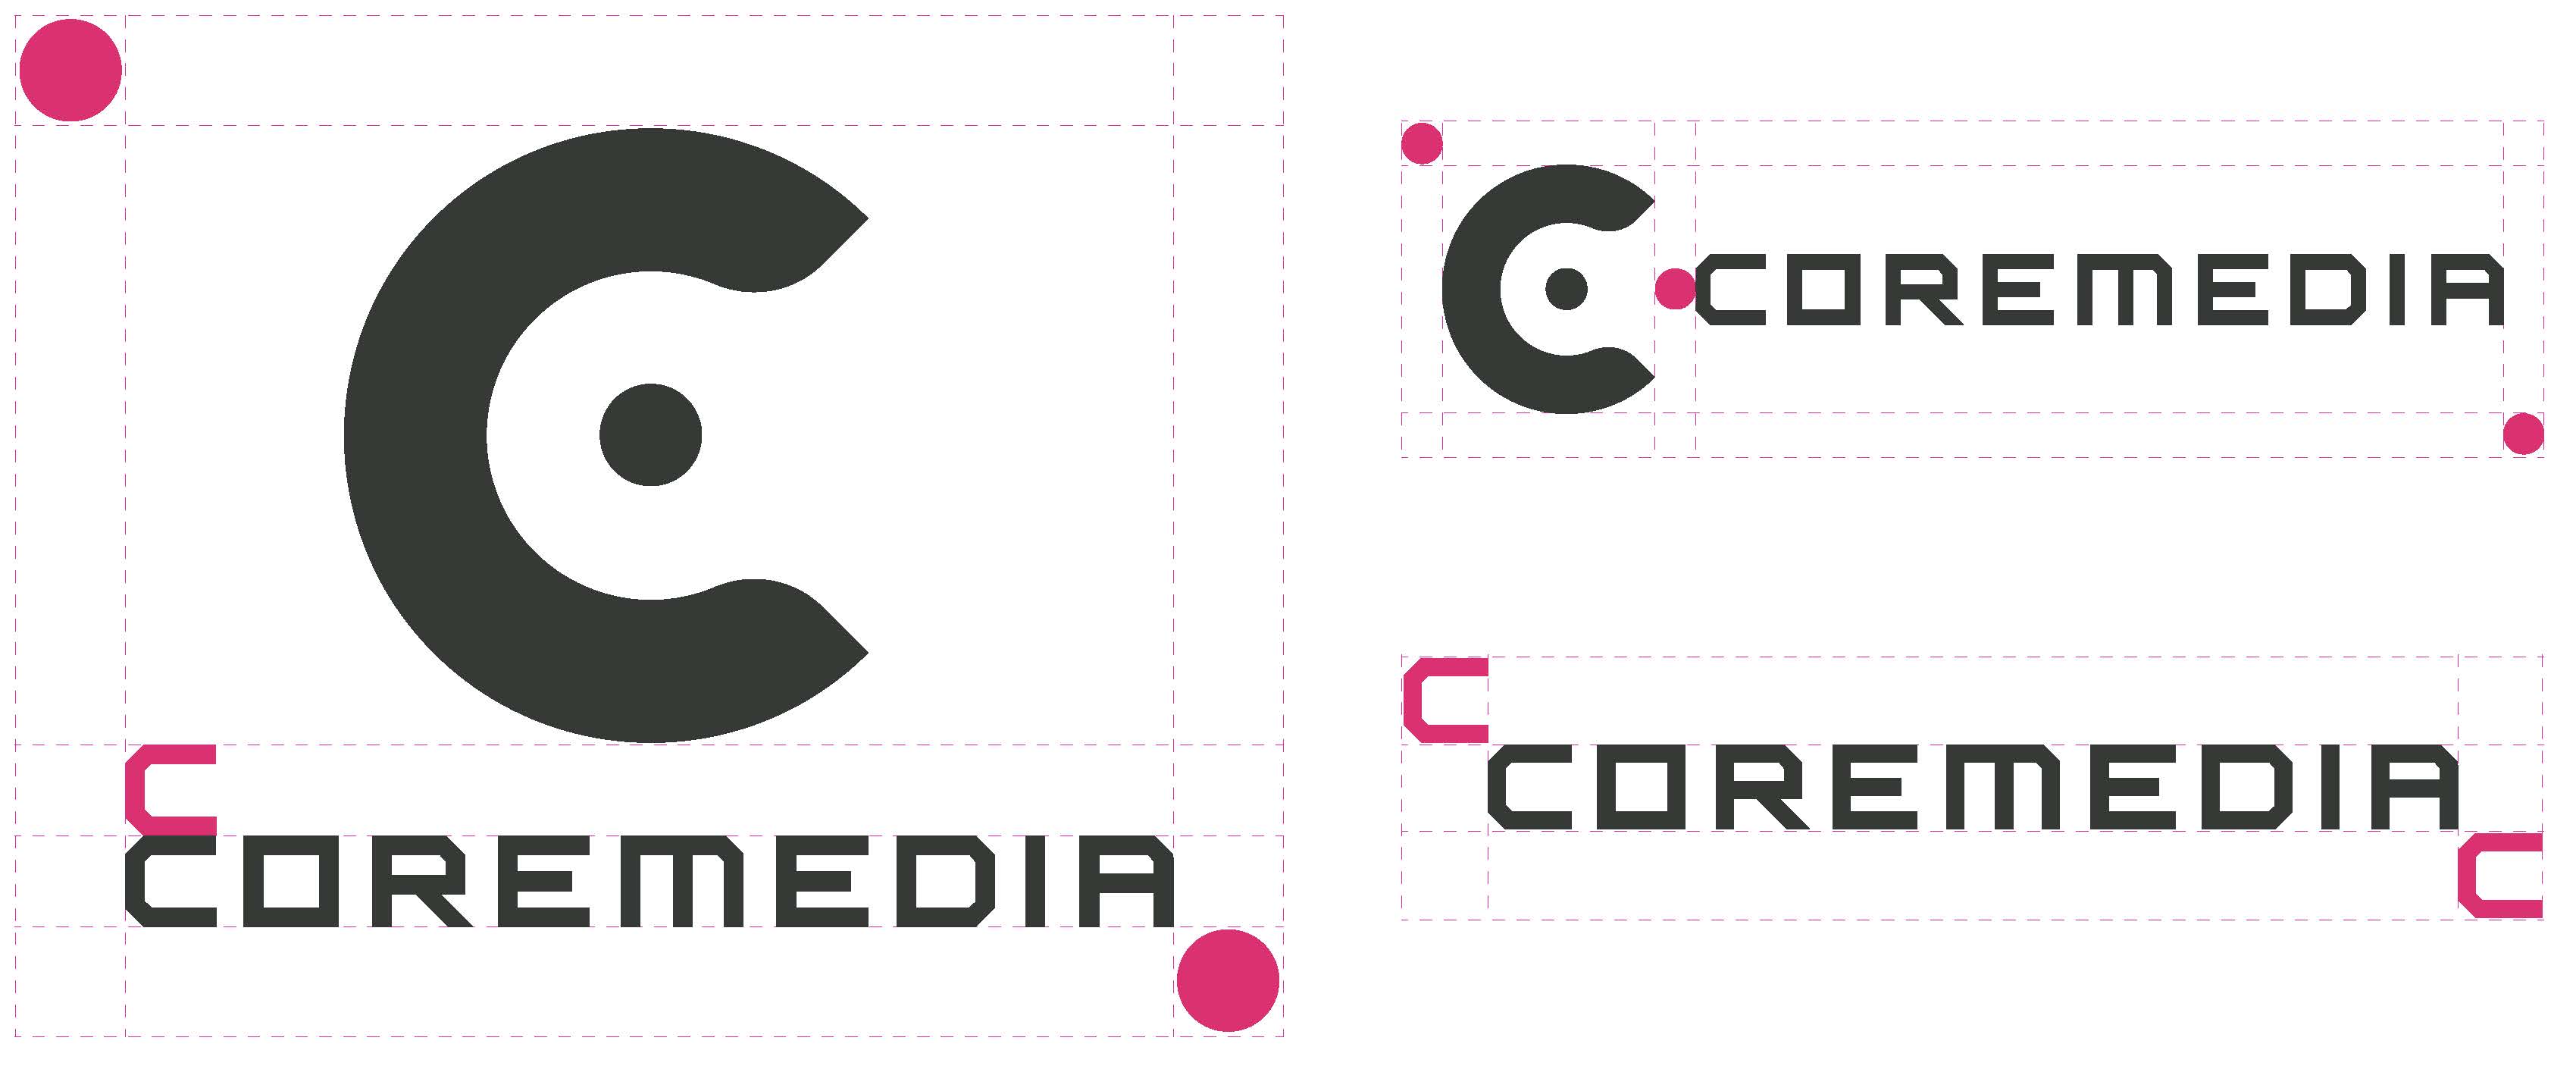 CoreMedia logo clearspace examples